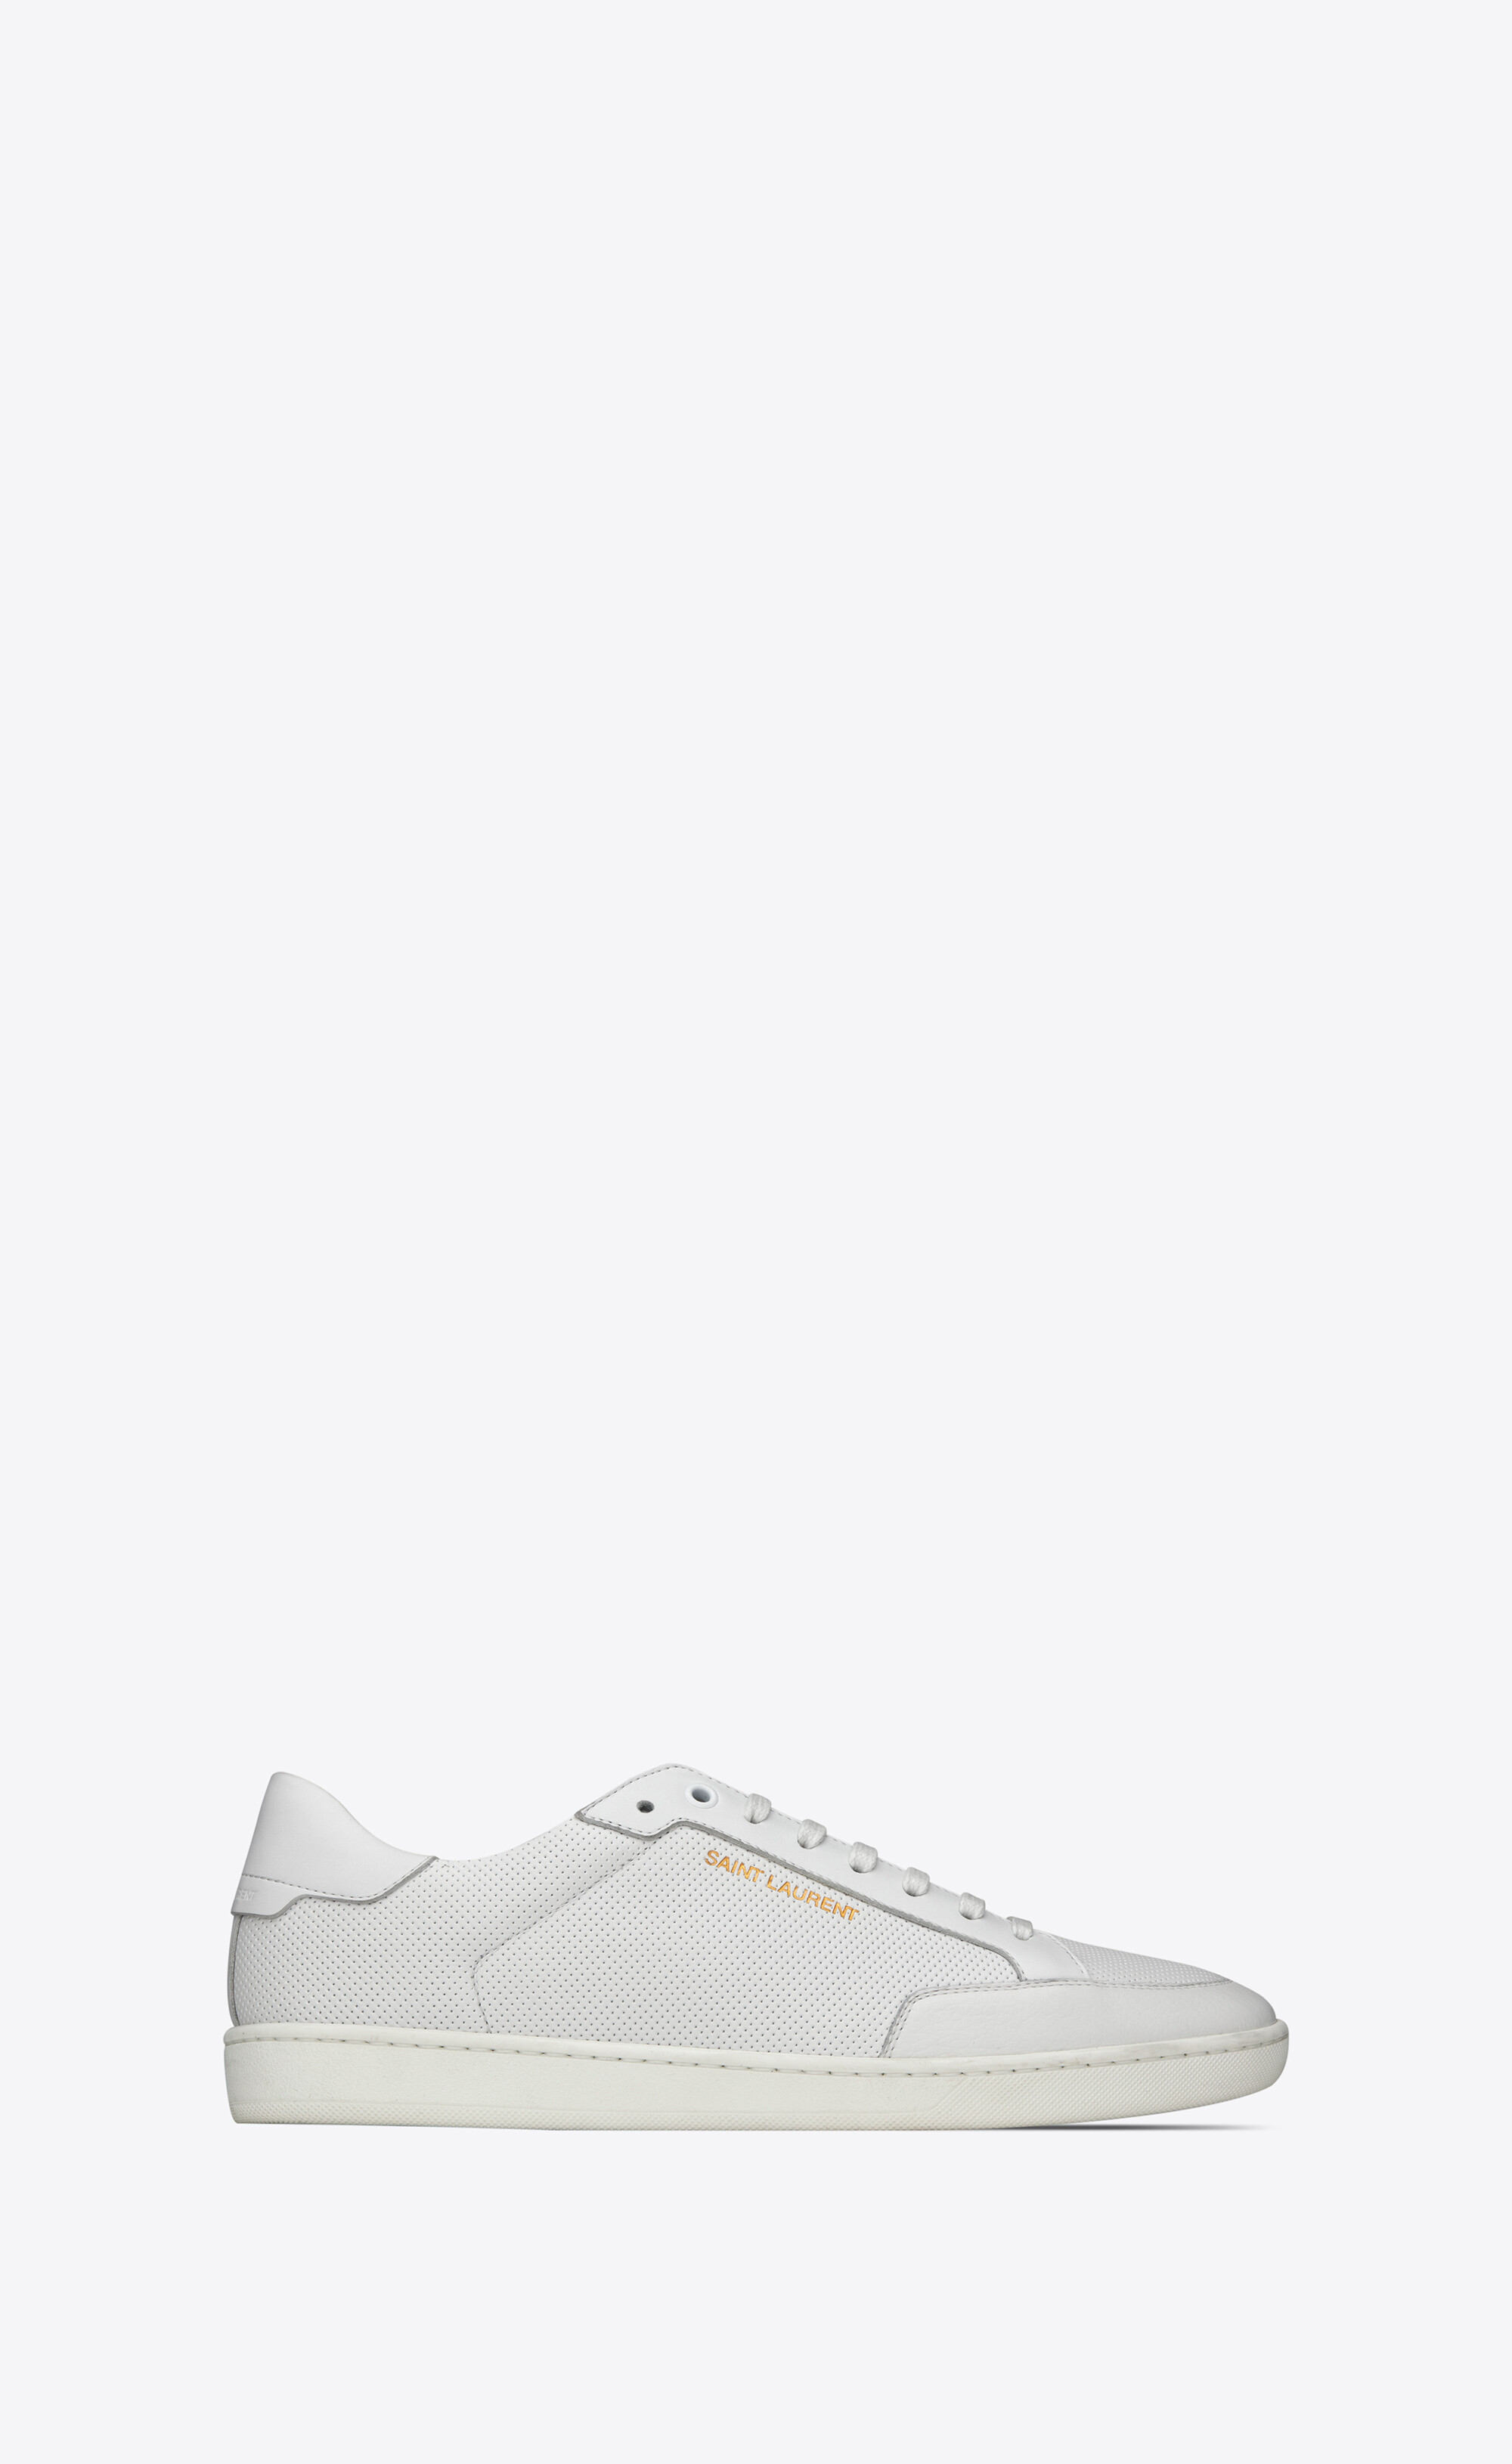 Court classic sl/10 sneakers perforated leather